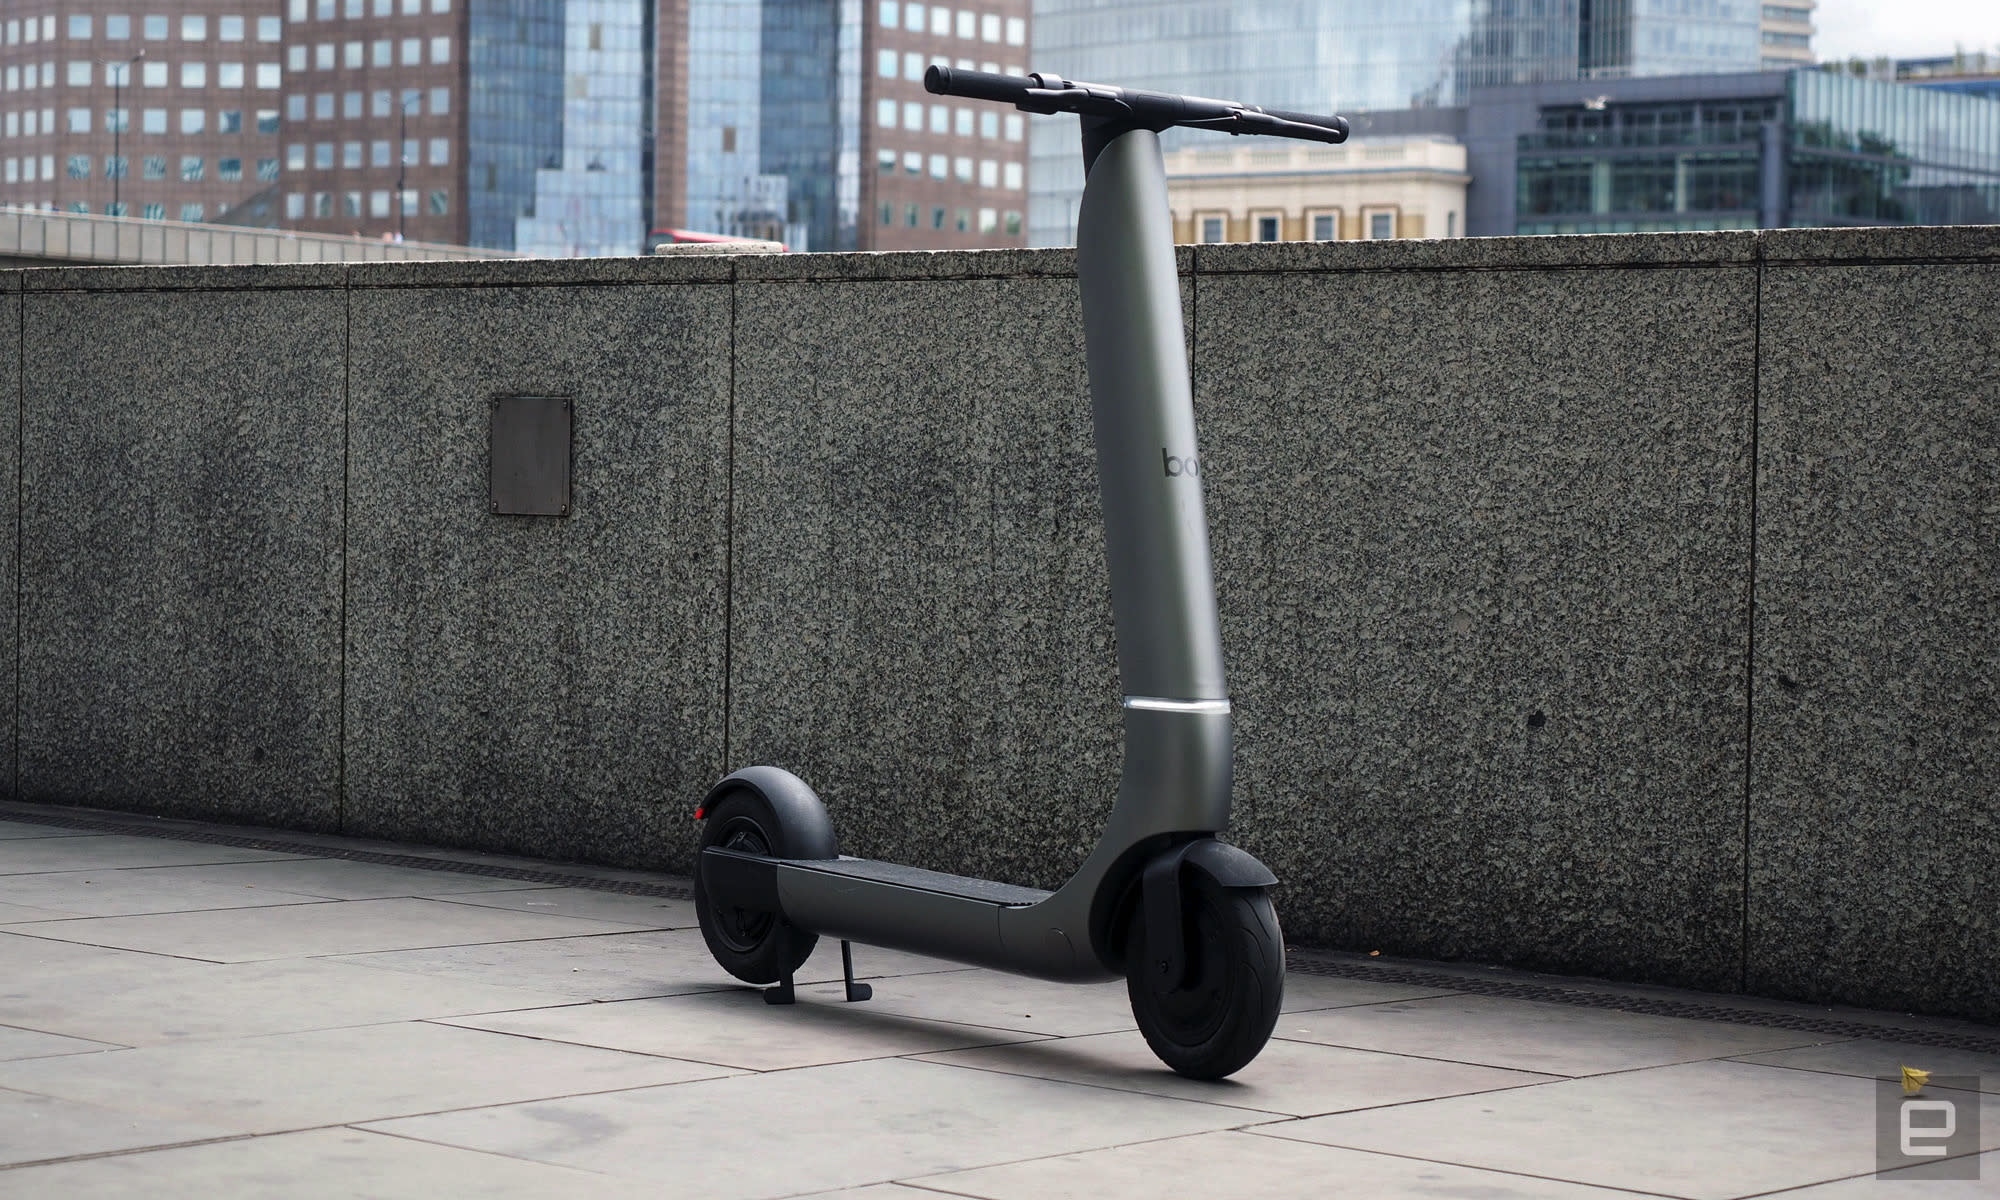 Bo's e-scooter is beyond state of the art | Engadget